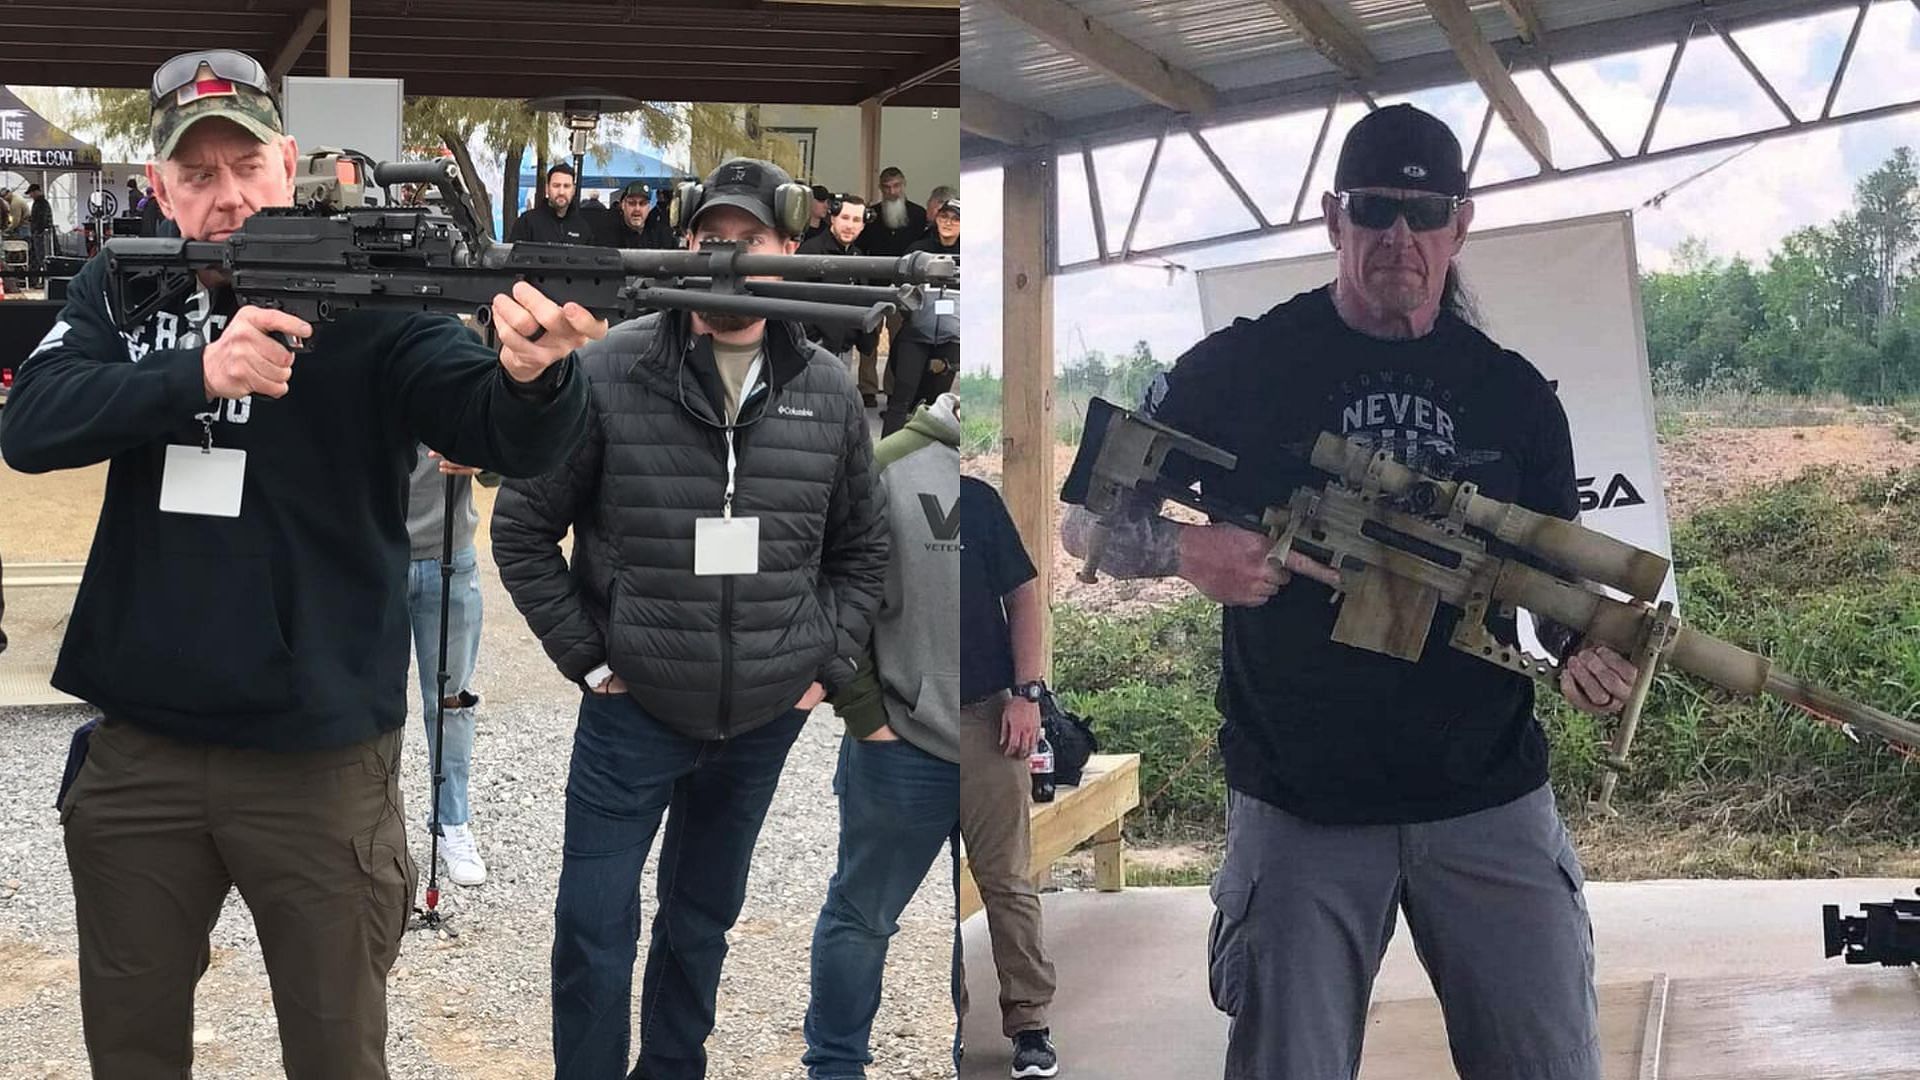 The Undertaker has a fascination for guns.